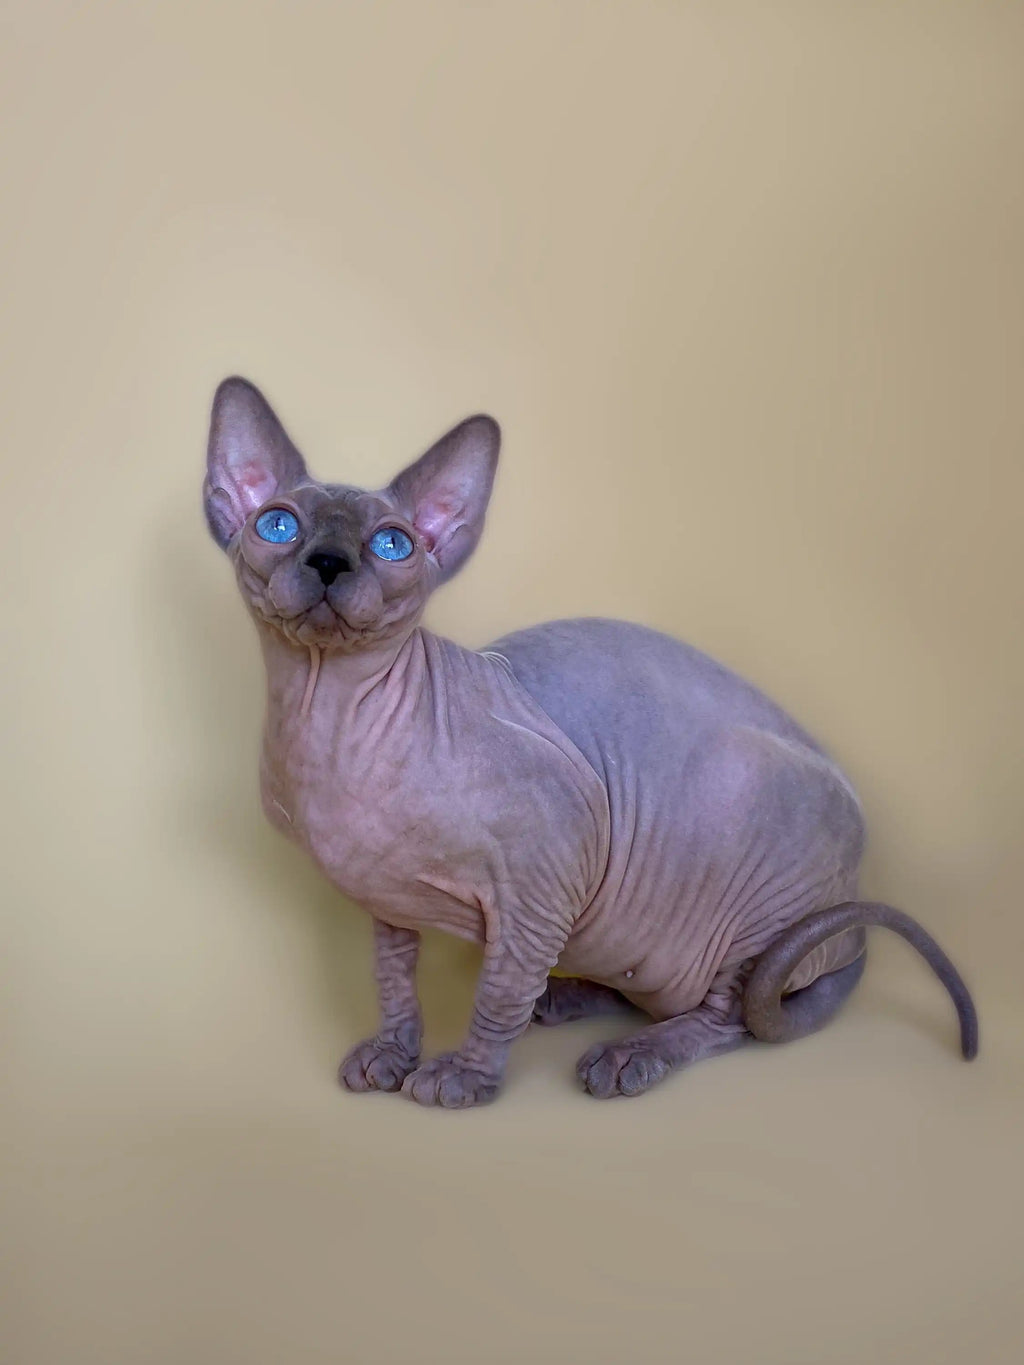 Sphynx Cats and Kittens for Sale Cinthia | Kitten